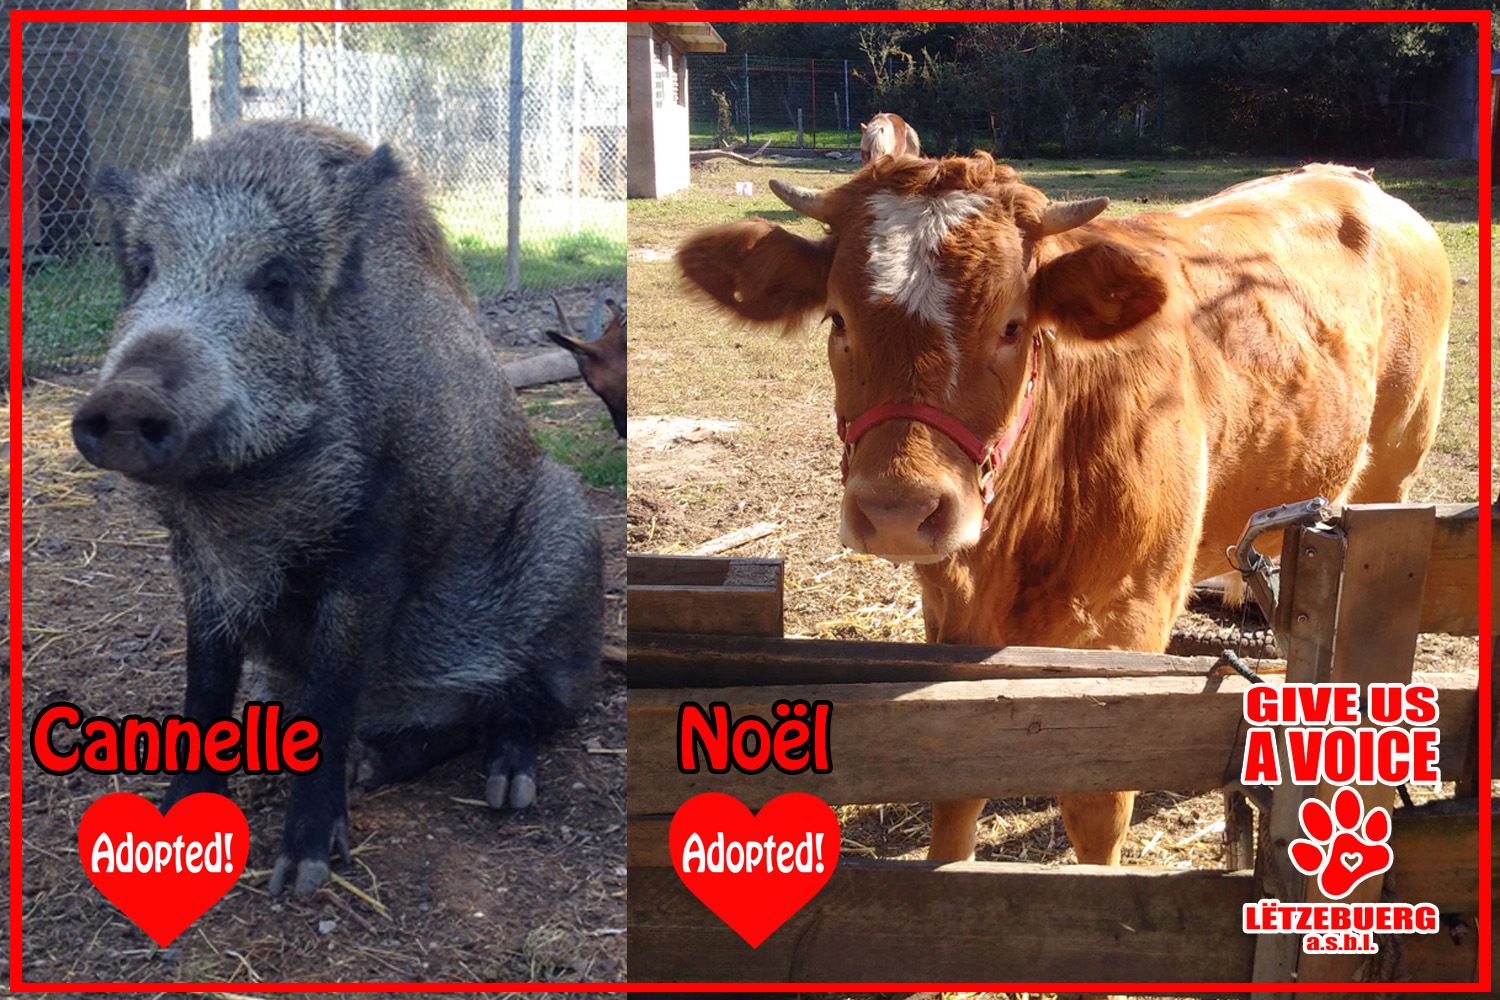 Noel and Cannelle Adopted